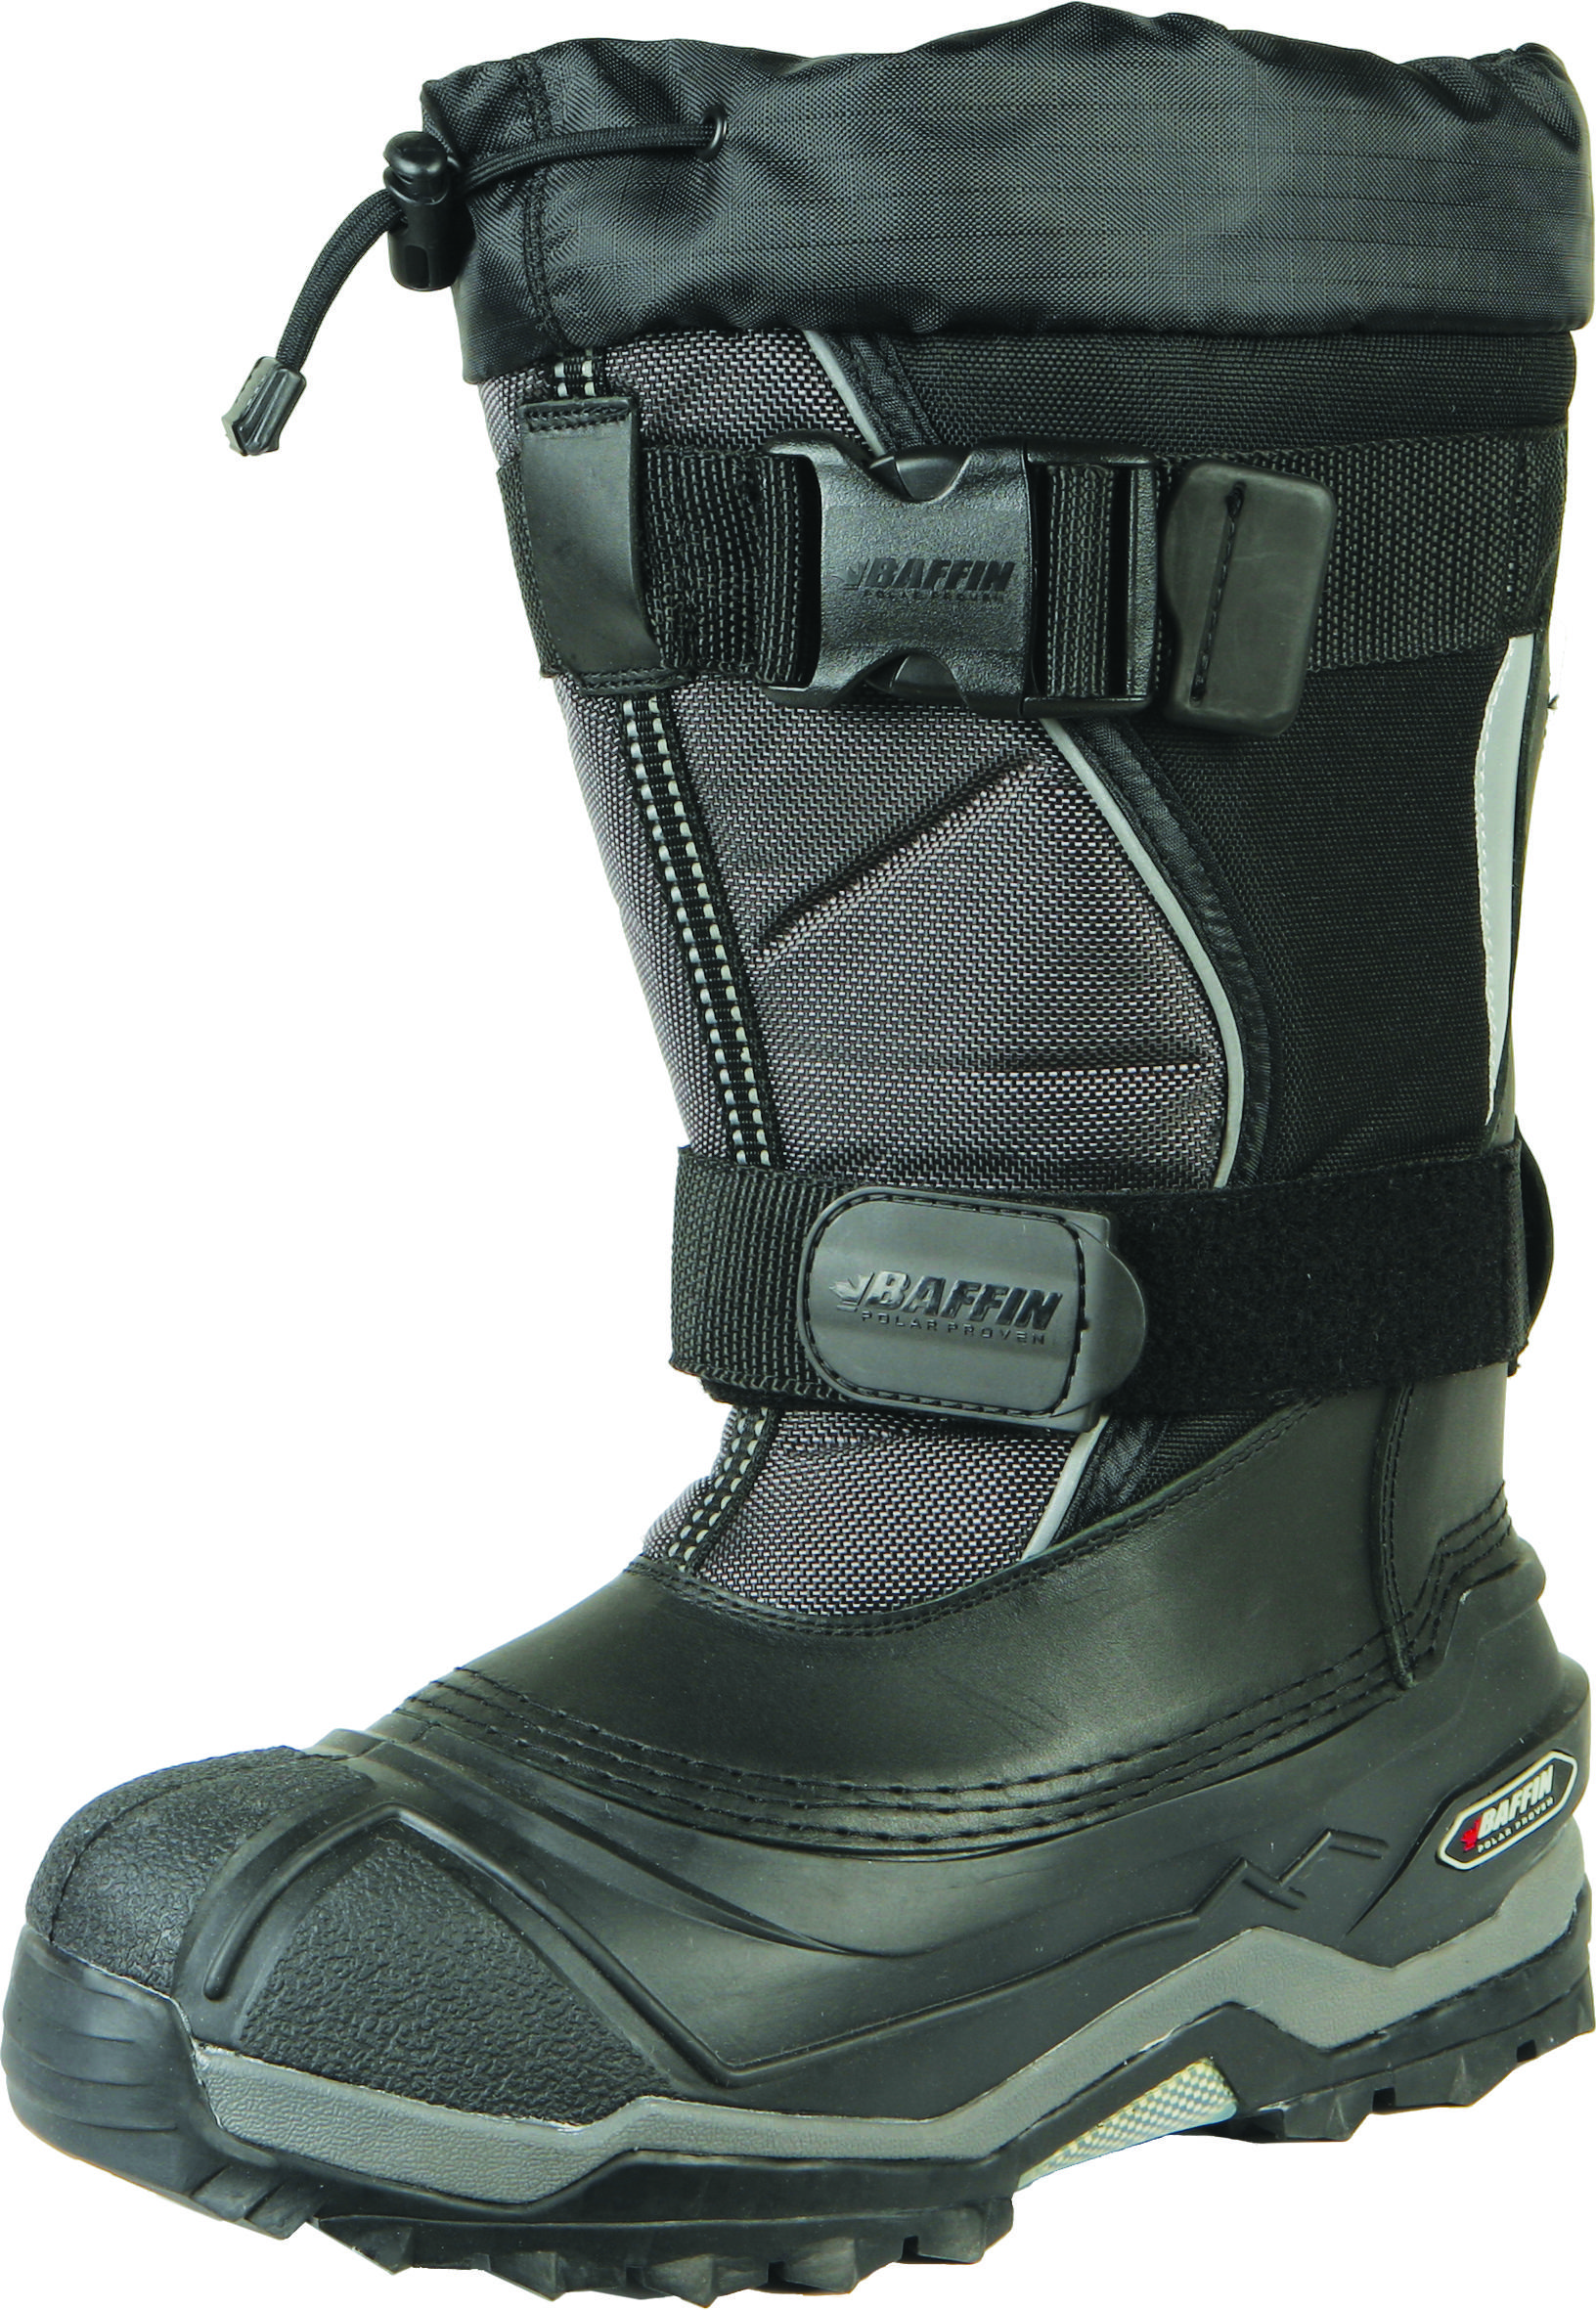 Selkirk Boots Black US 10 - Click Image to Close